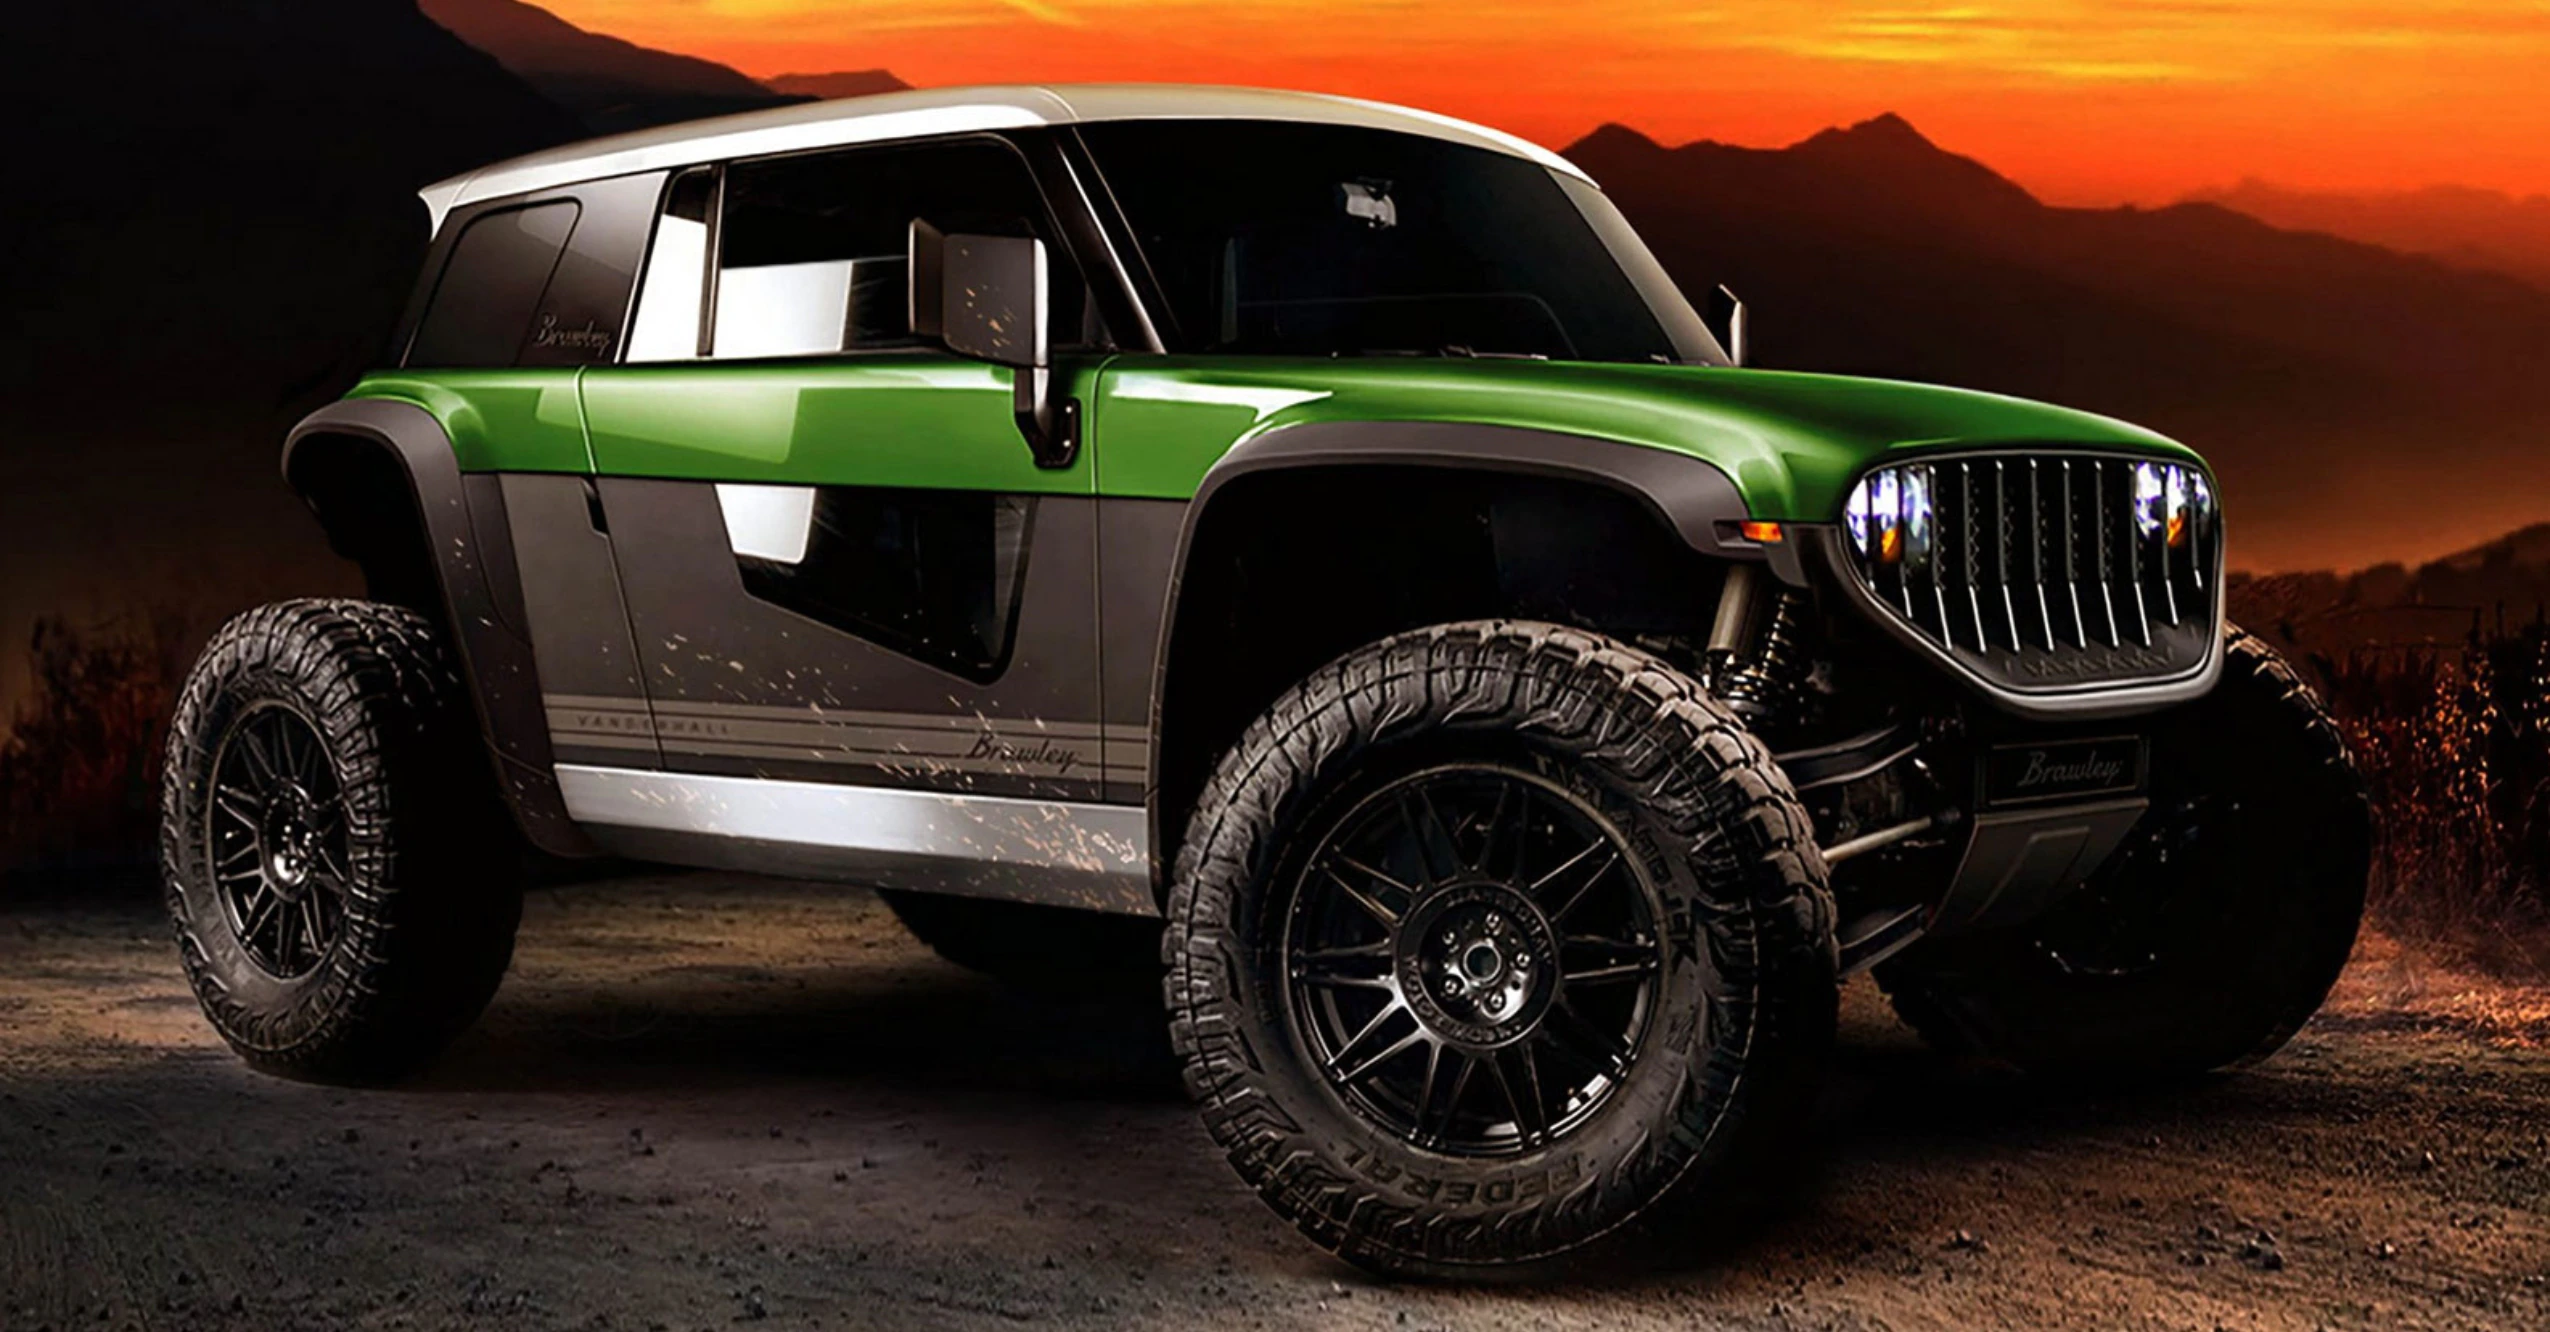 Meet the Eye-Popping Electric ‘Brawler’ 4×4 That Costs Less Than $35,000